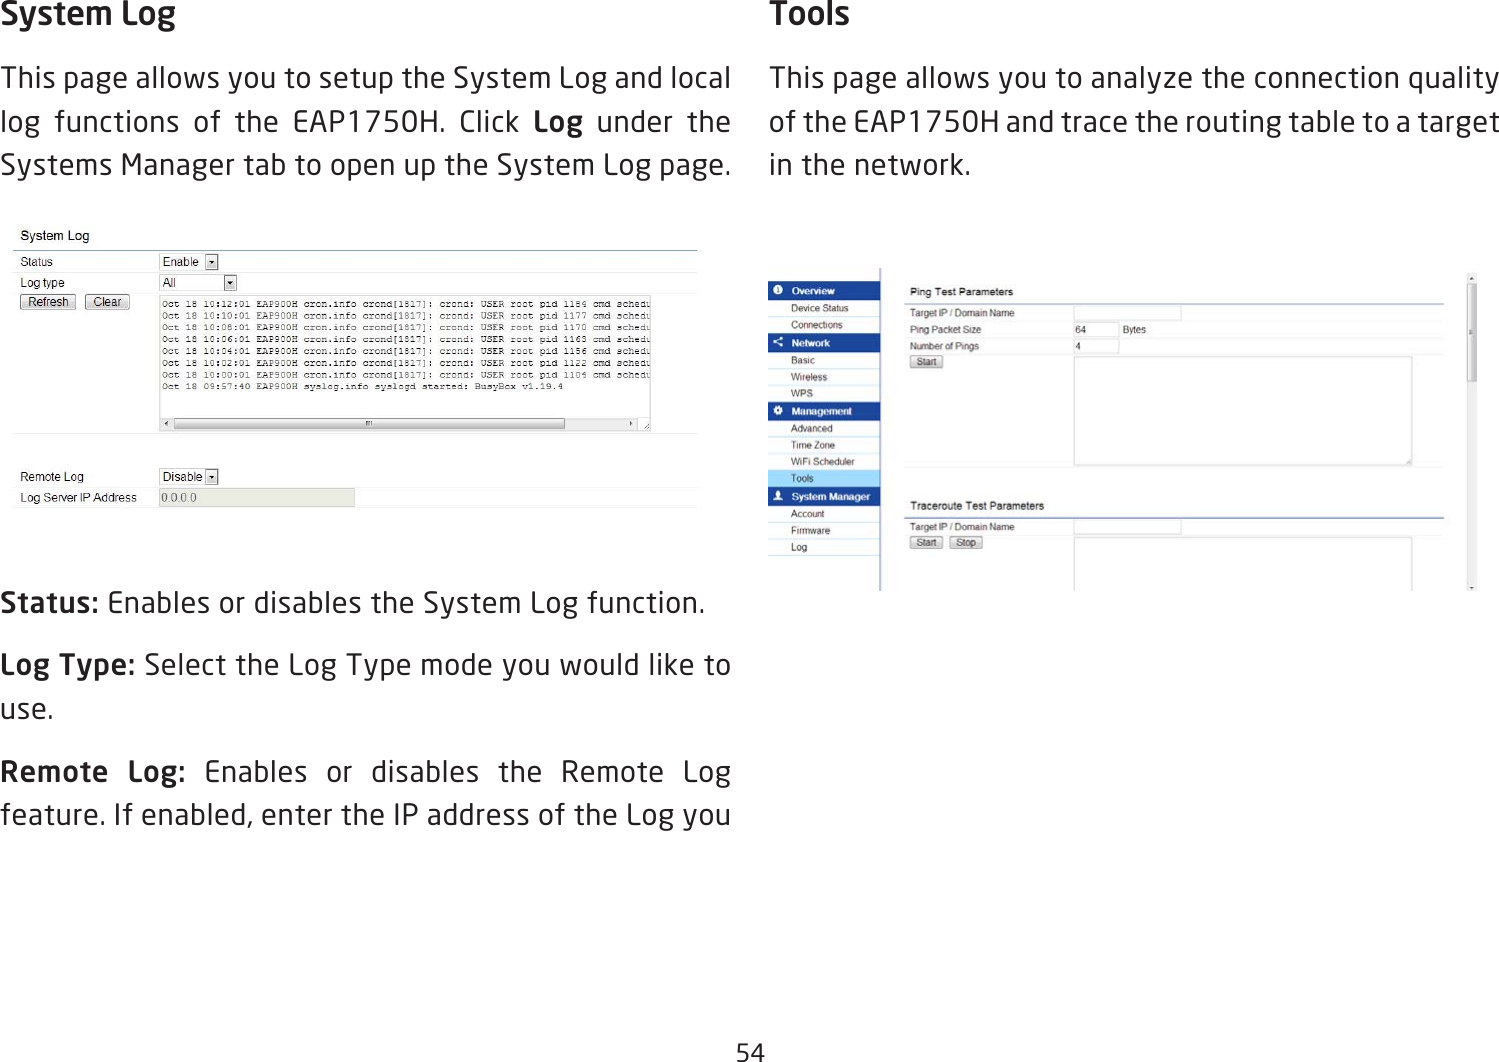 54System LogThis page allows you to setup the System Log and local log functions of the EAP1750H. Click Log under the Systems Manager tab to open up the System Log page.Status: Enables or disables the System Log function.Log Type: Select the Log Type mode you would like to use.Remote  Log:  Enables or disables the Remote Log feature. If enabled, enter the IP address of the Log youToolsThis page allows you to analyze the connection quality of the EAP1750H and trace the routing table to a target in the network.